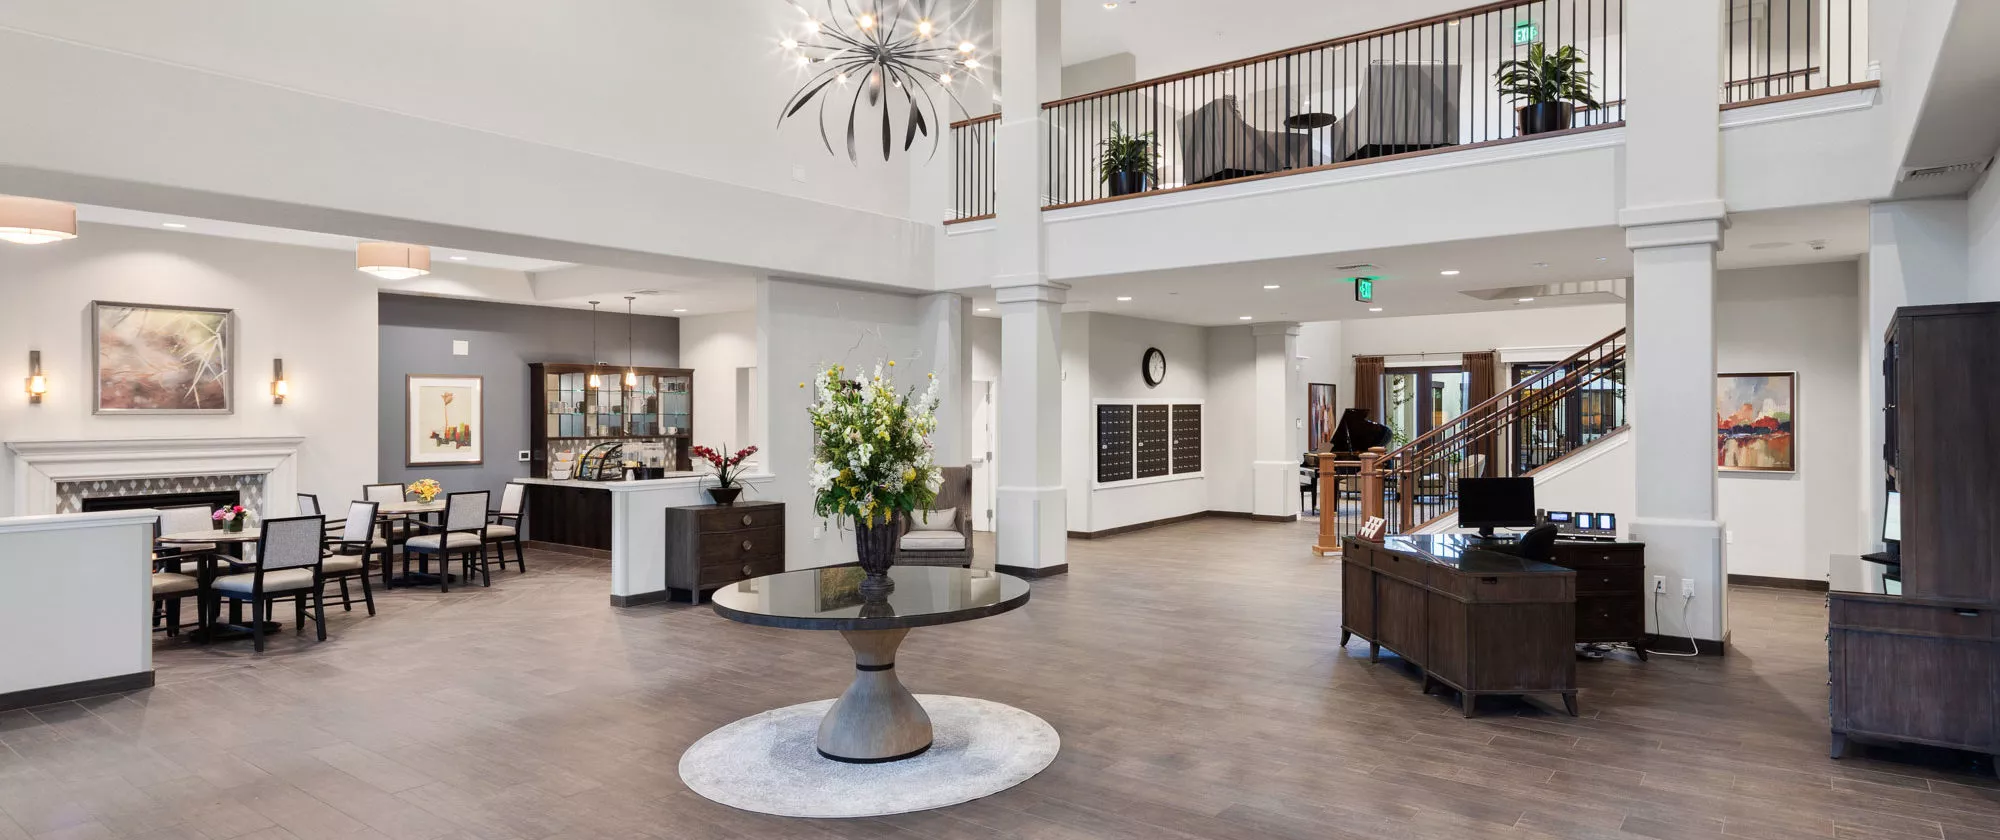 East Sacramento entry hall with beautiful chandelier